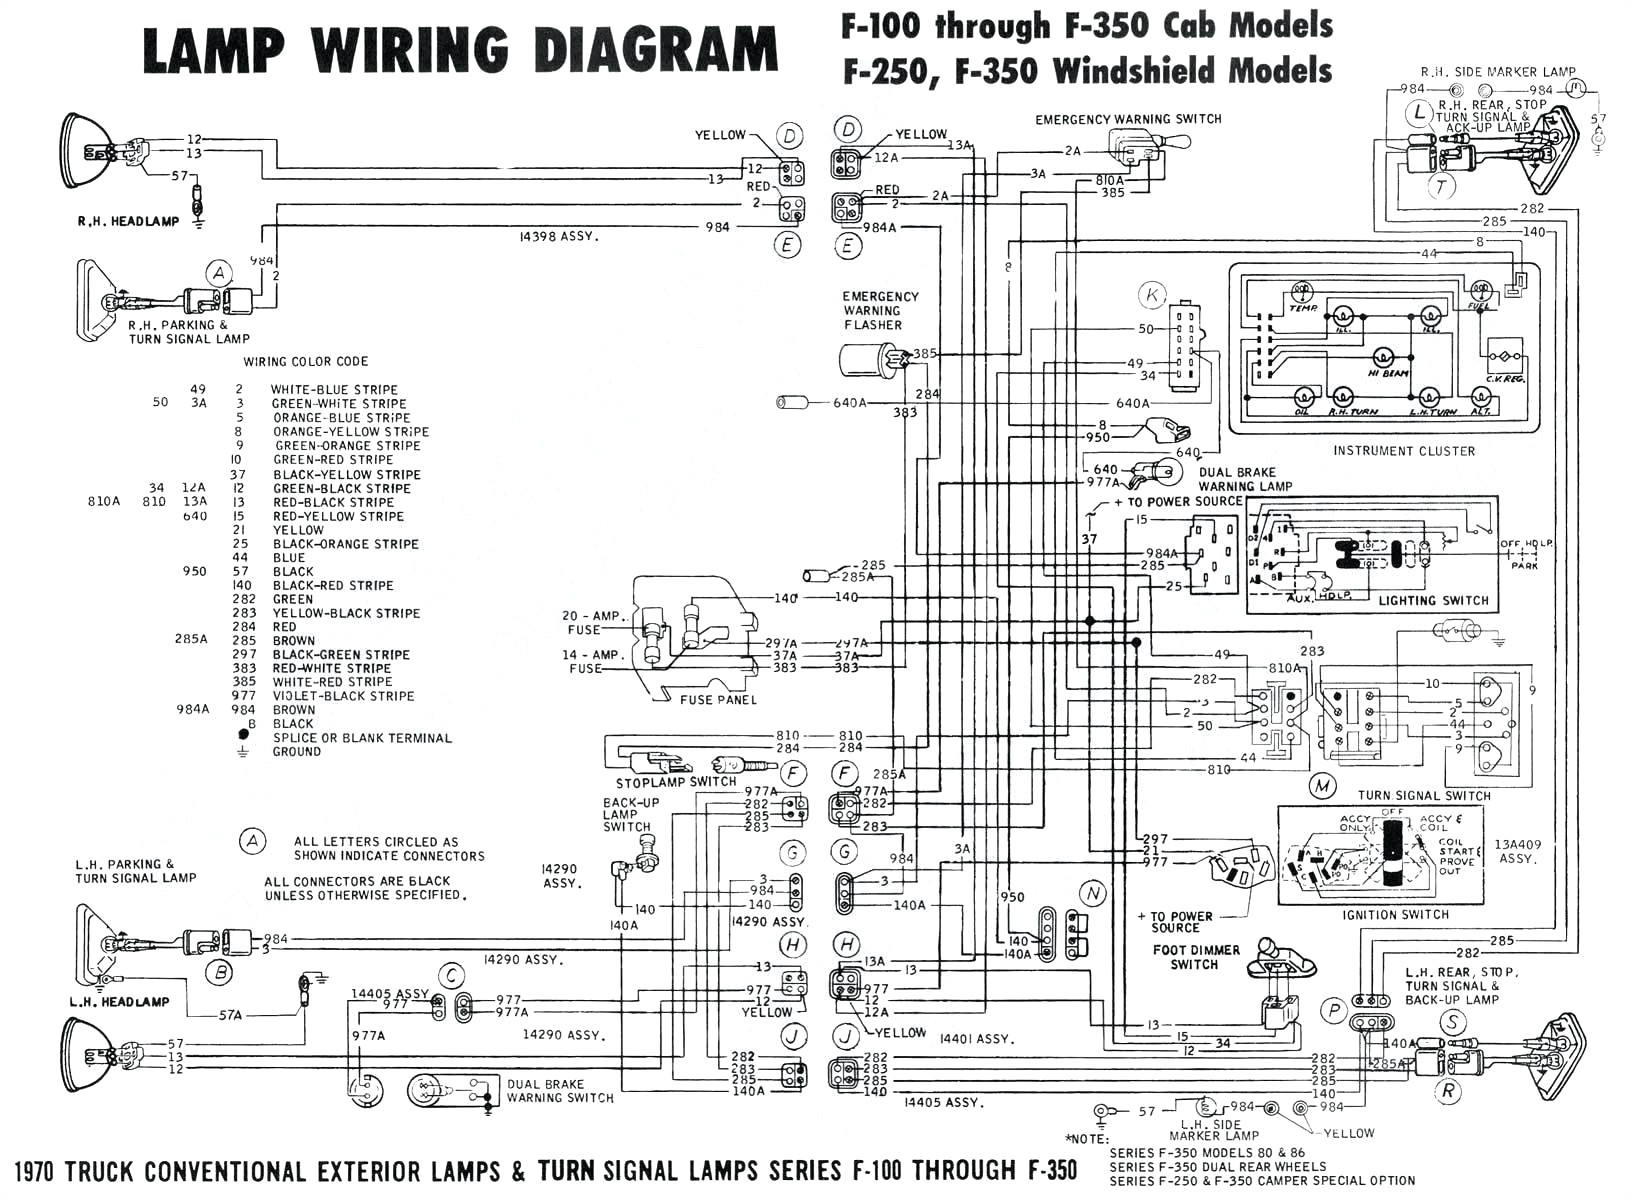 1951 ford ignition switch wiring wiring diagram blog 1951 ford headlight switch wiring